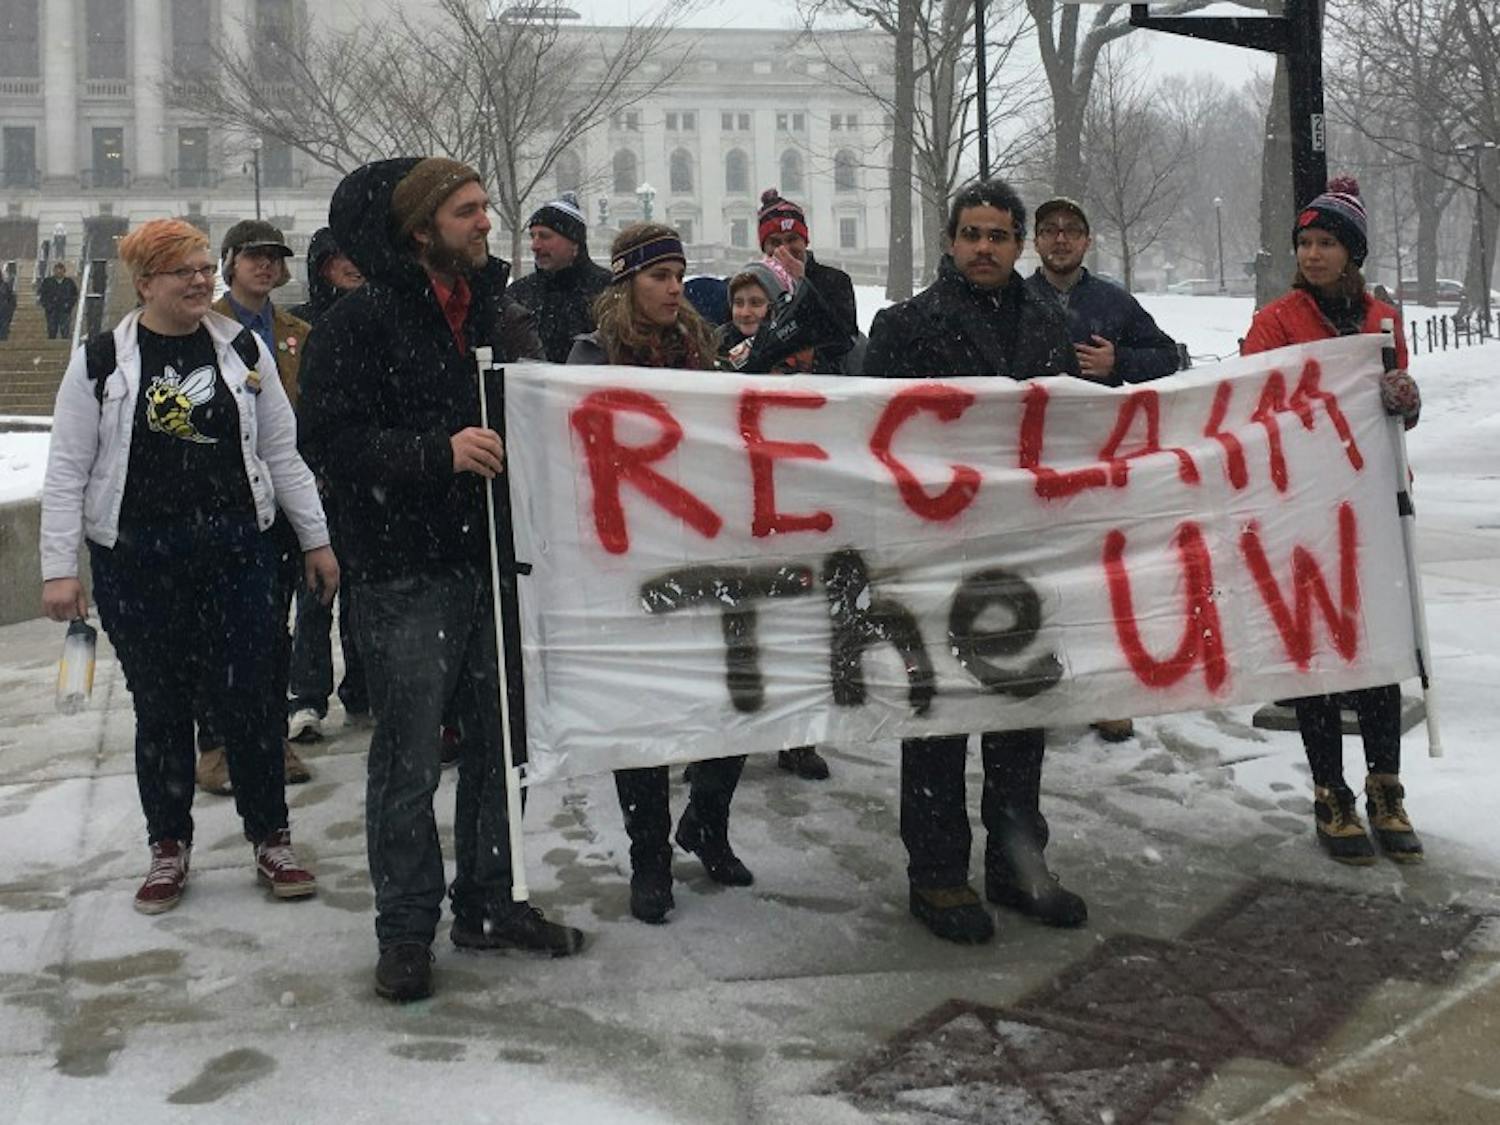 System students gathered in Madison to protest what they called an attack on the Wisconsin Idea.